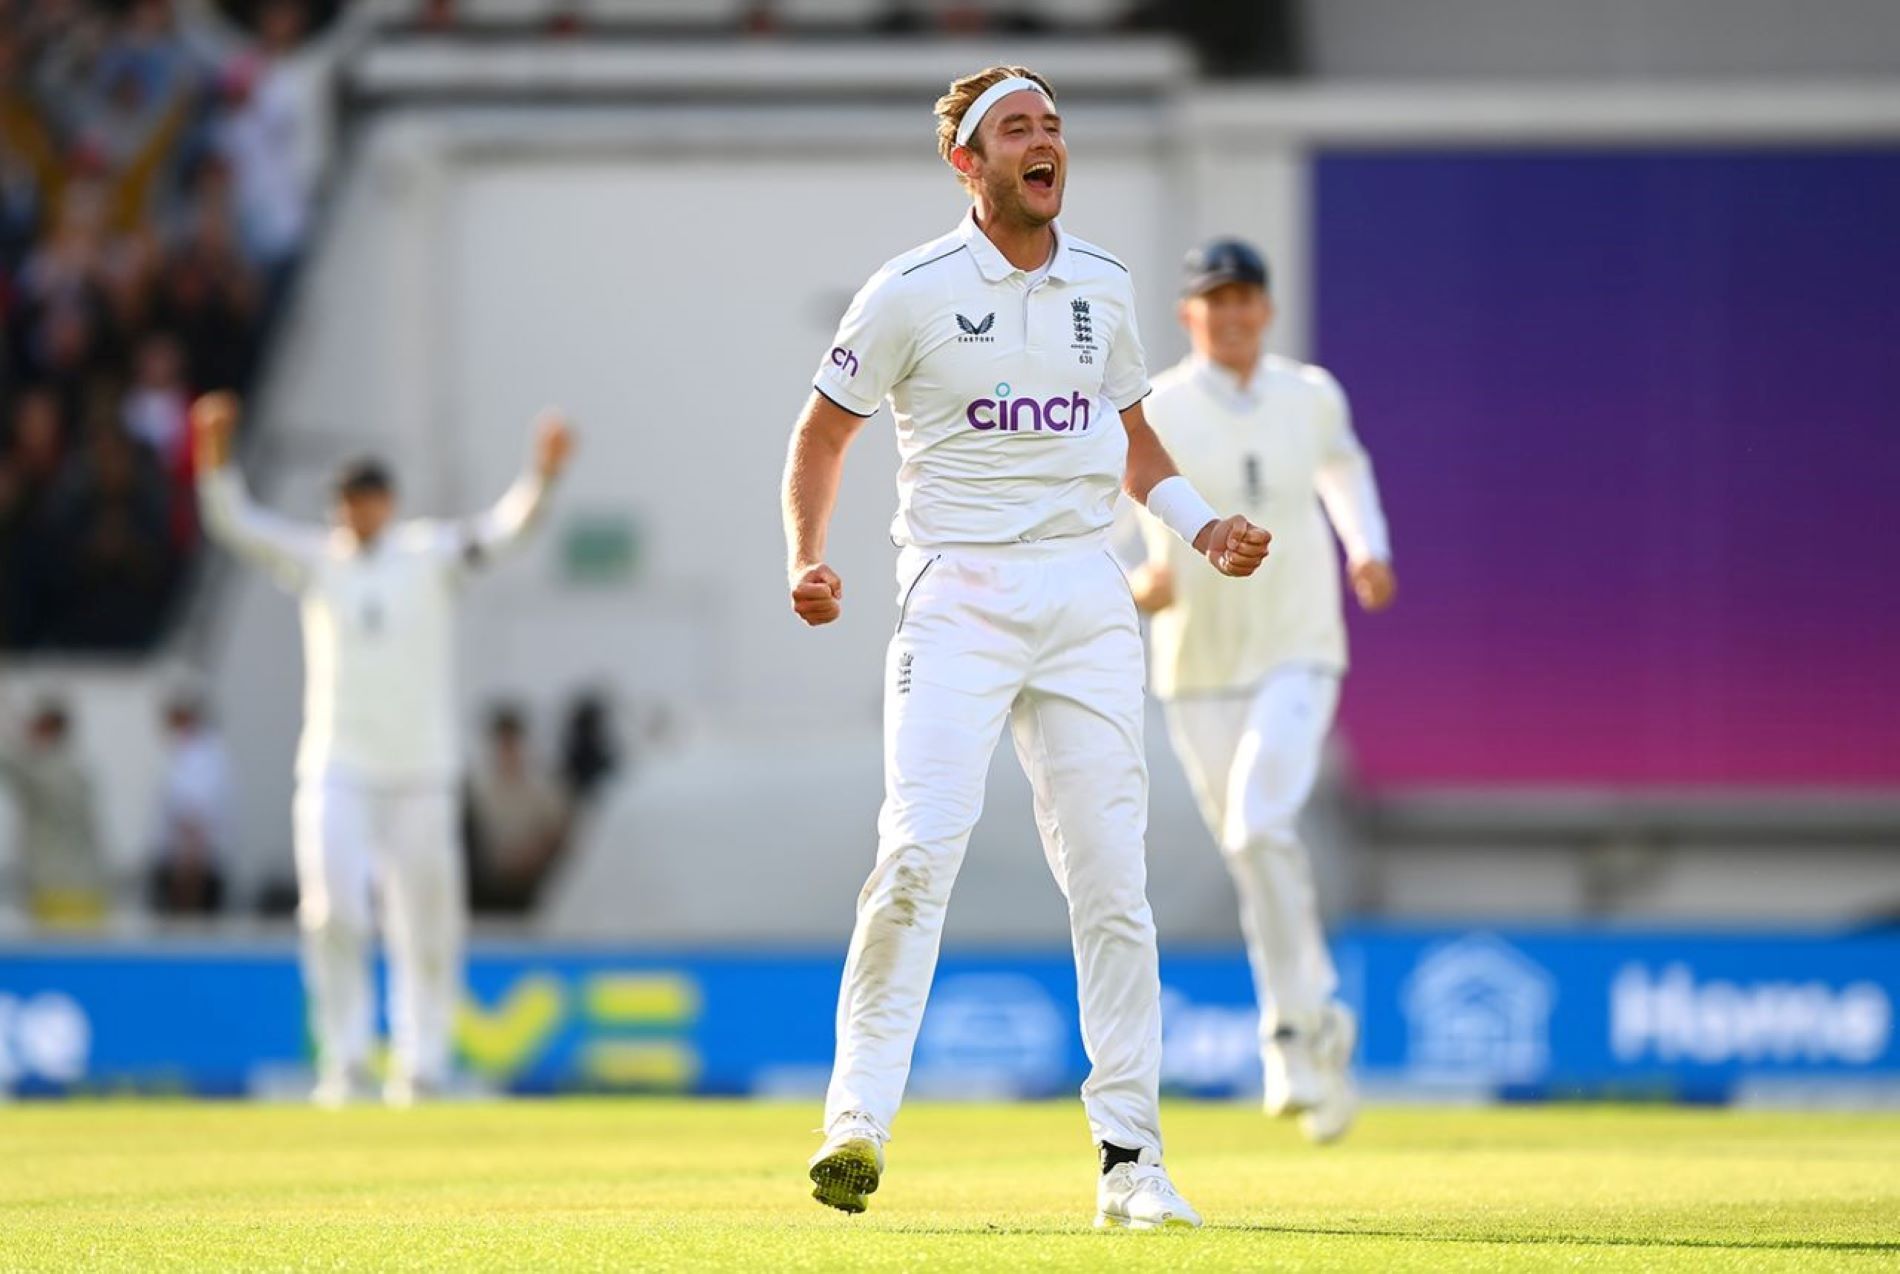 Broad ended his internaional career with the final two wickets of the Australian innings